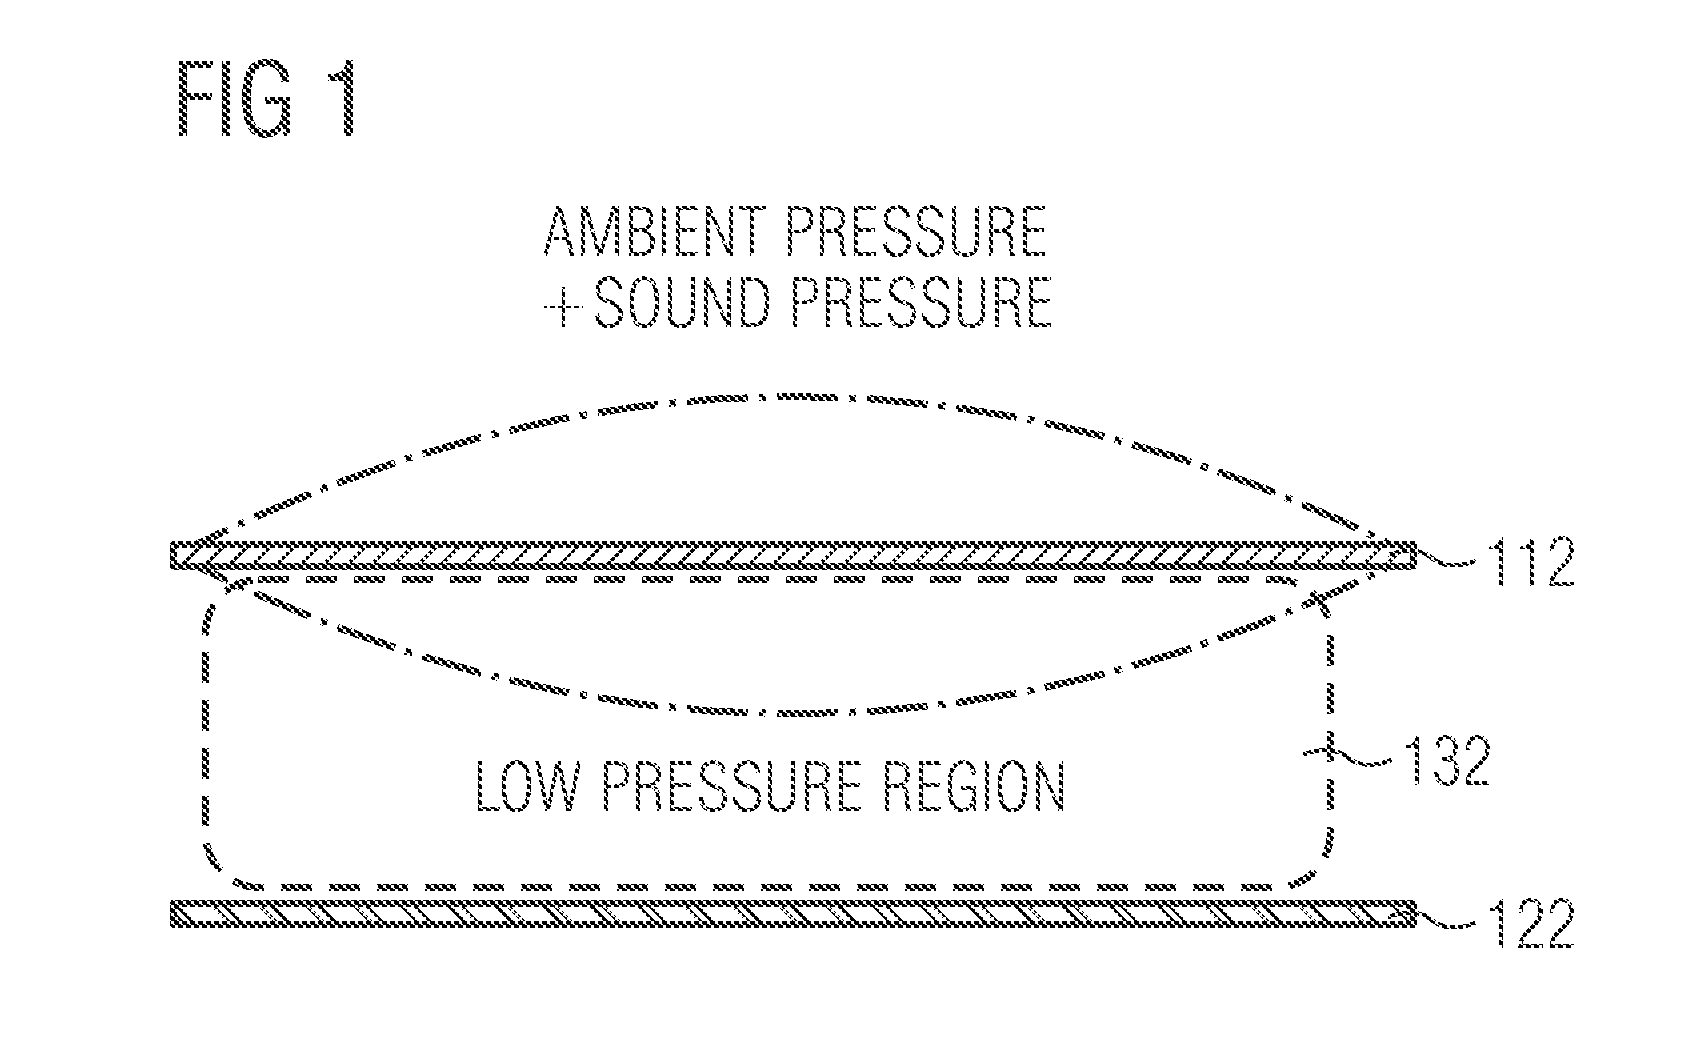 MEMS Microphone with Low Pressure Region Between Diaphragm and Counter Electrode